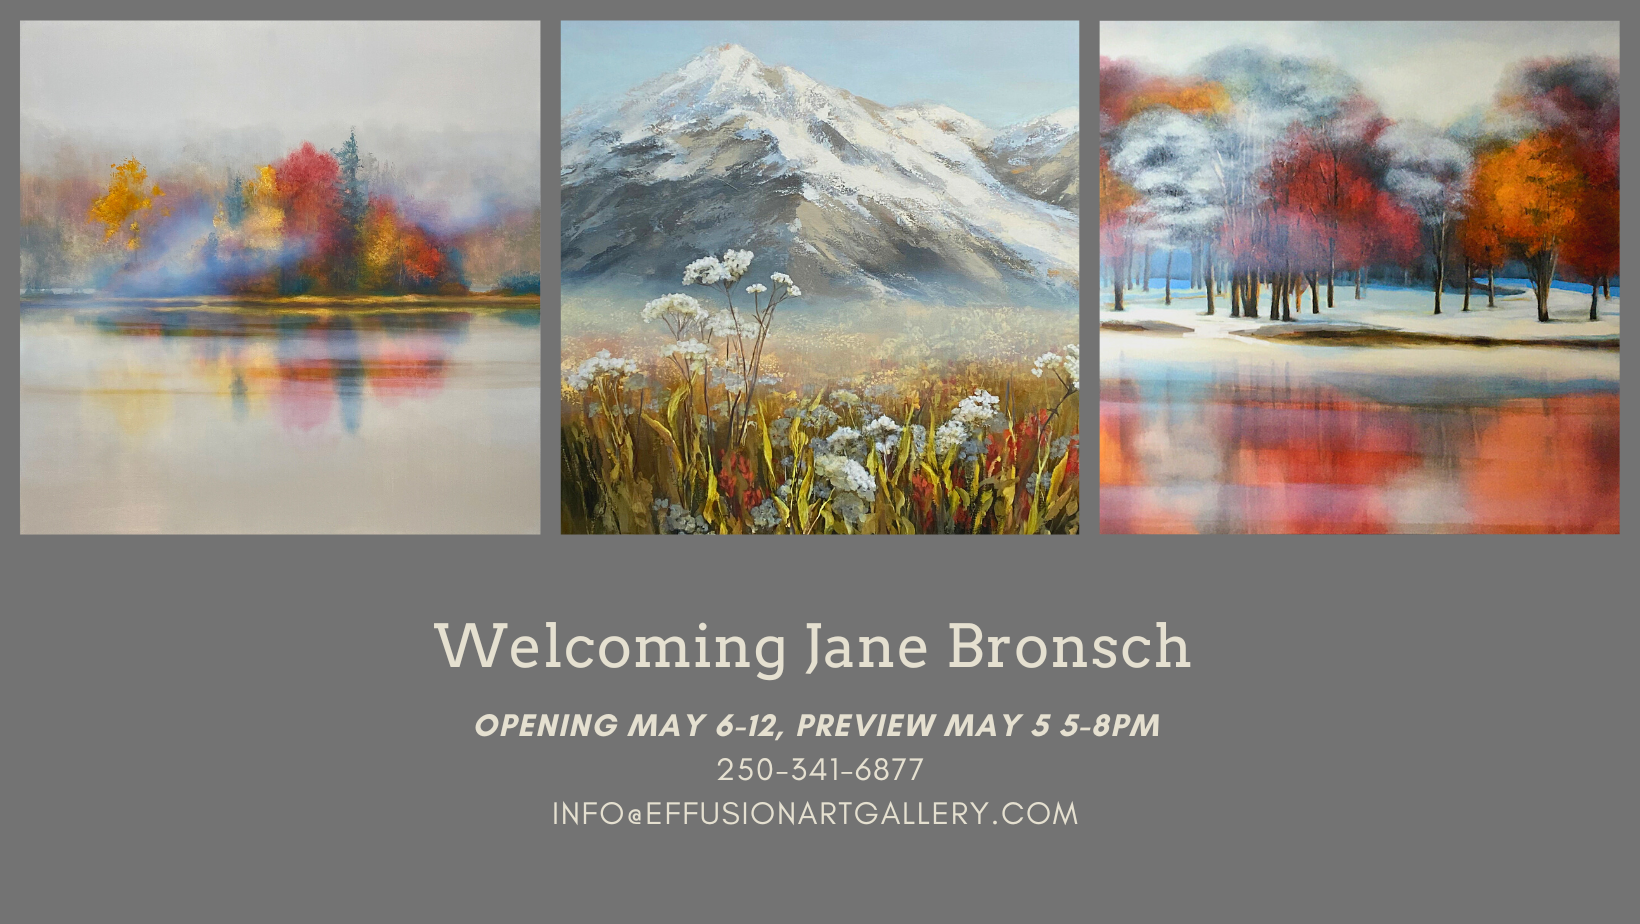 Featuring Jane Bronsch May 5-12 at Effusion Art Gallery in Invermere, BC